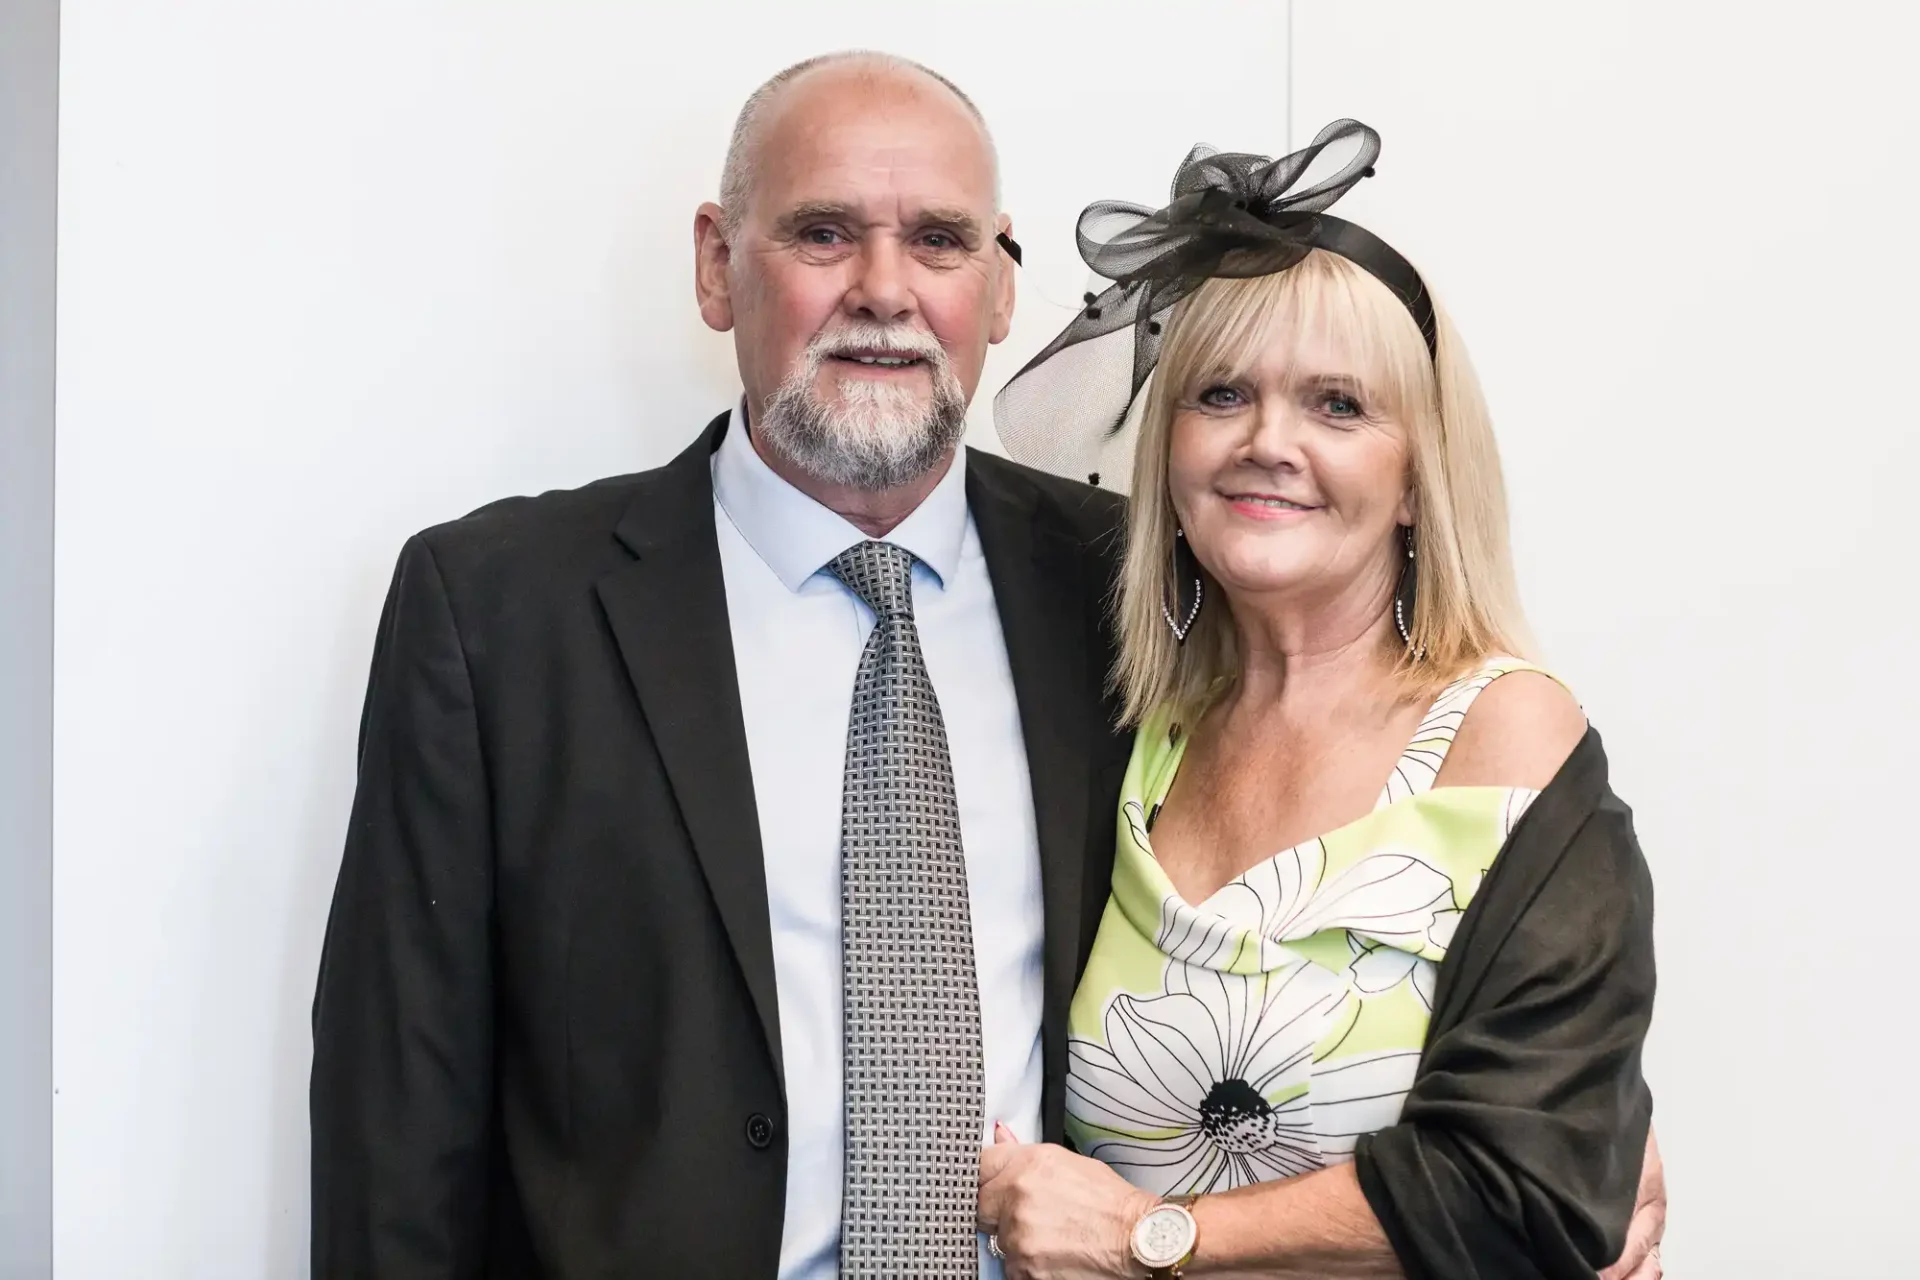 An older man and woman posing together; he is in a suit and she wears a floral dress with a black fascinator.